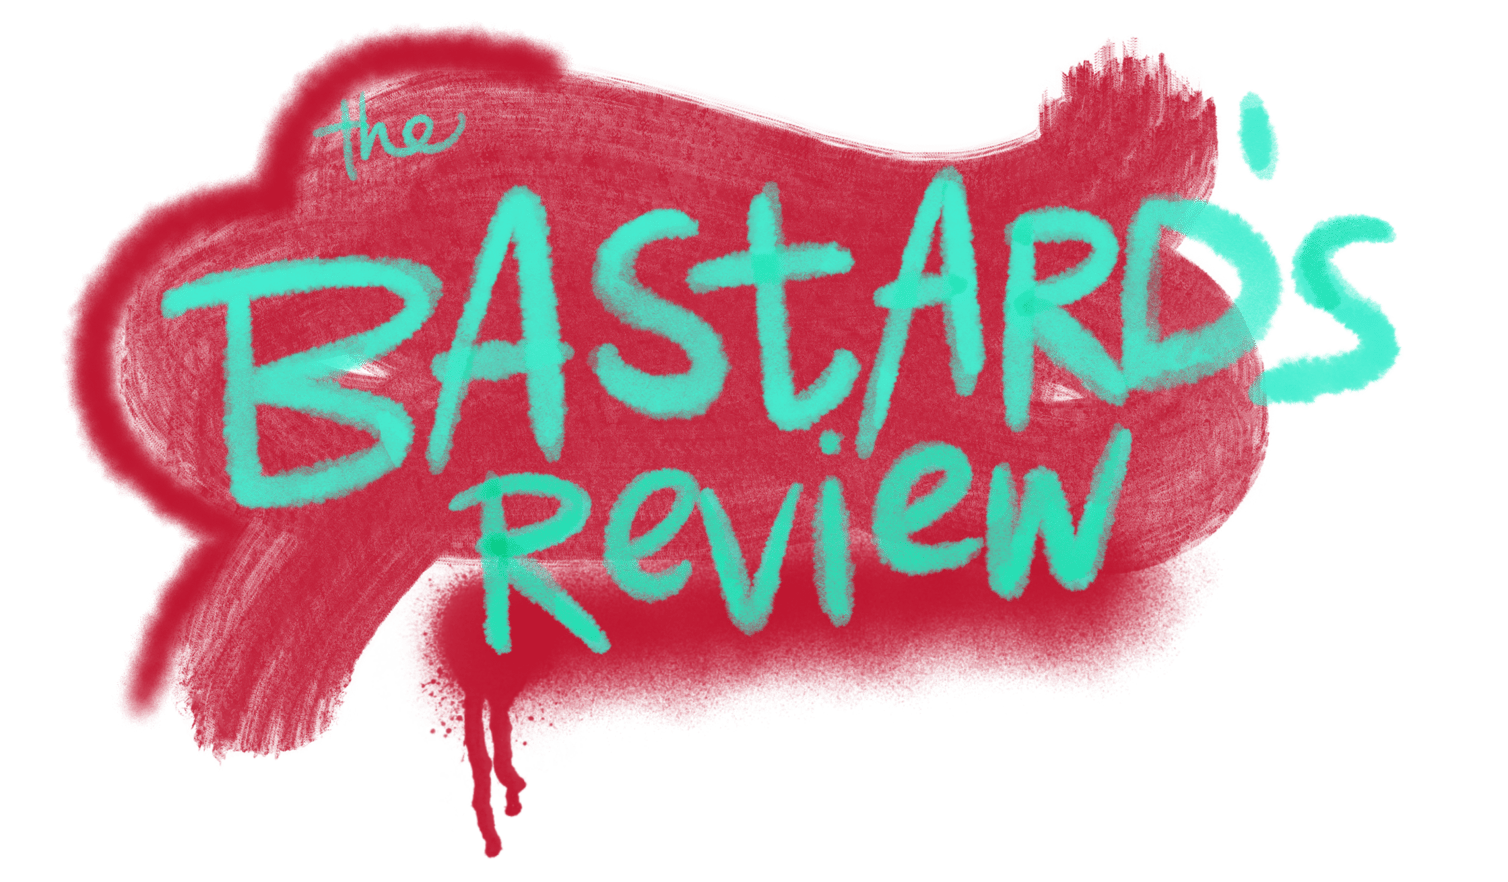 The Bastard's Review Home